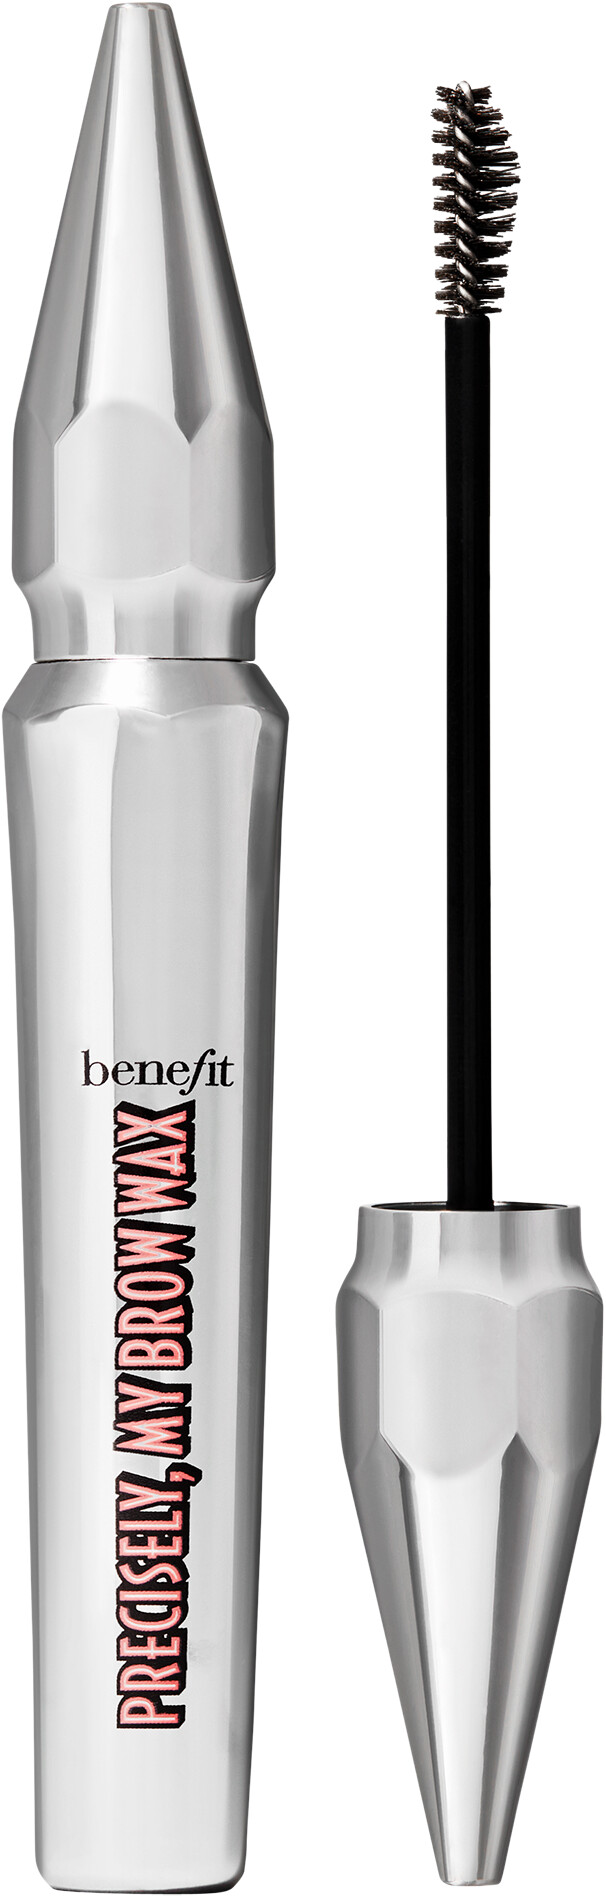 Benefit Precisely, My Brow Wax Full-Pigment Sculpting Brow Wax 5g 6 - Cool Soft Black